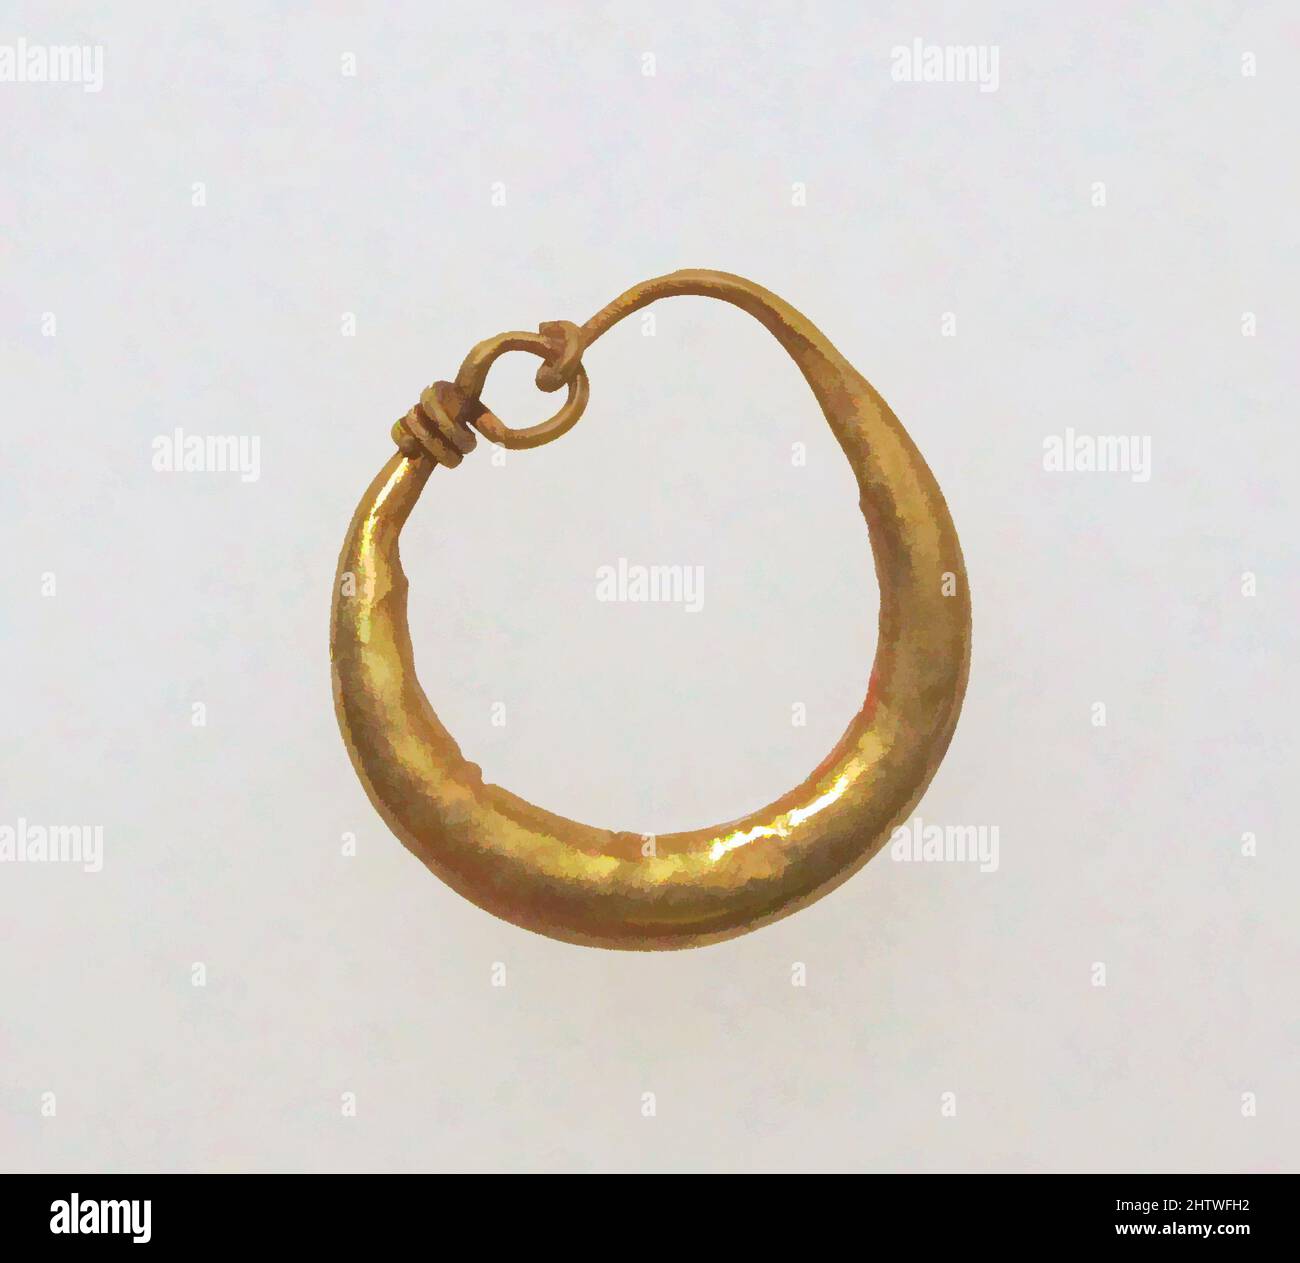 Art inspired by Earring-loop type, plain, Gold, Other: 11/16 x 1/8 x 3/4 in. (1.8 x 0.4 x 1.9 cm), Gold and Silver, Classic works modernized by Artotop with a splash of modernity. Shapes, color and value, eye-catching visual impact on art. Emotions through freedom of artworks in a contemporary way. A timeless message pursuing a wildly creative new direction. Artists turning to the digital medium and creating the Artotop NFT Stock Photo